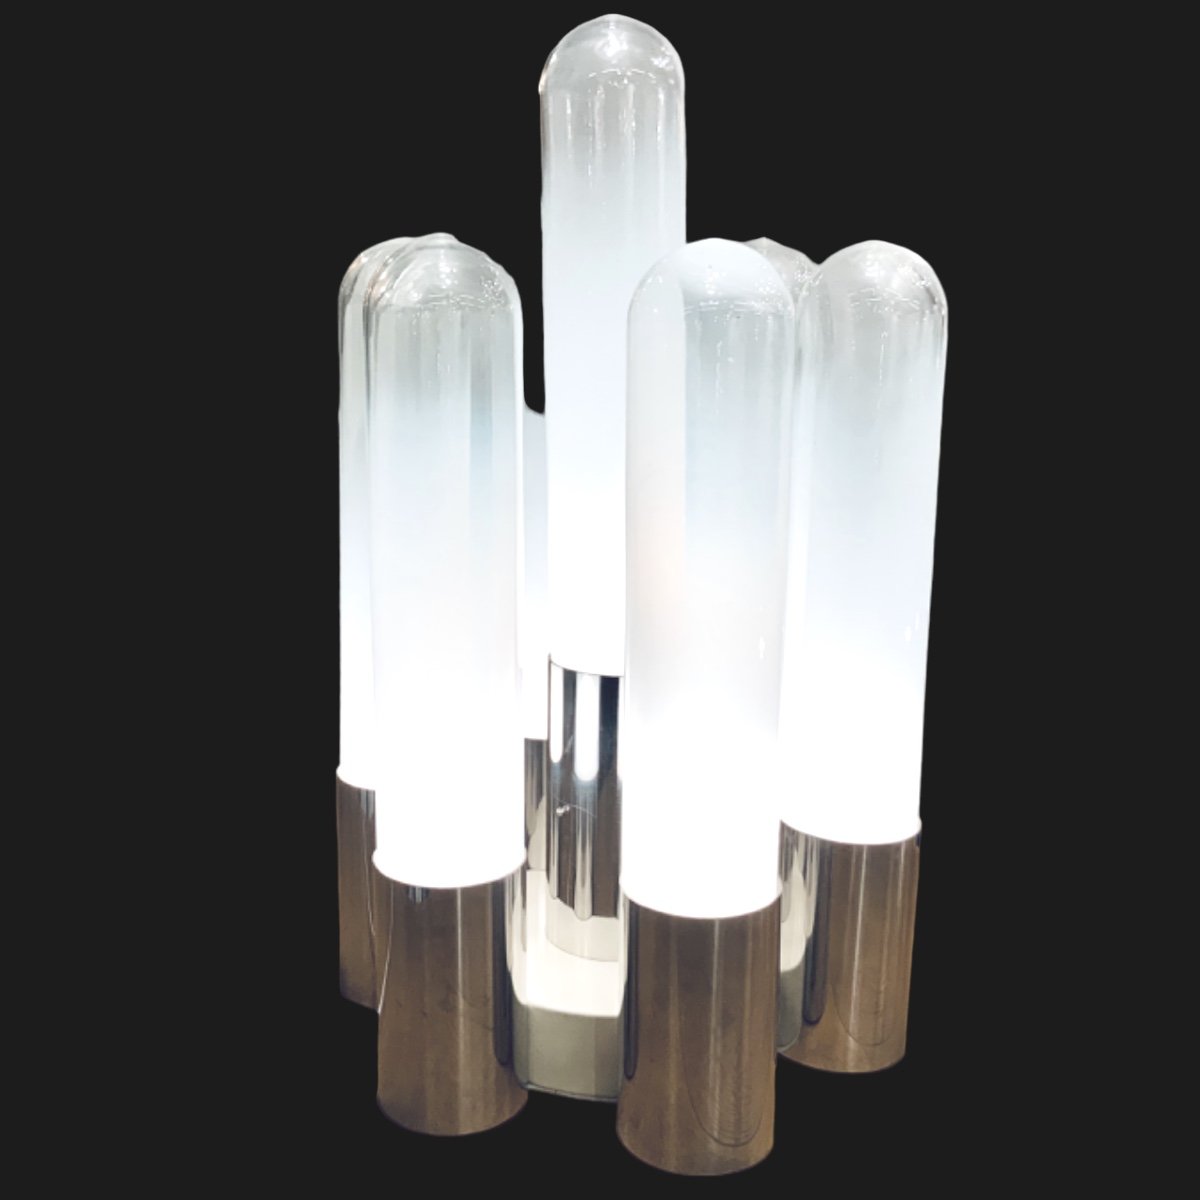 1970s Italian Table Lamp In Chrome And Opalescent Glass By Carlos Nazon-photo-1